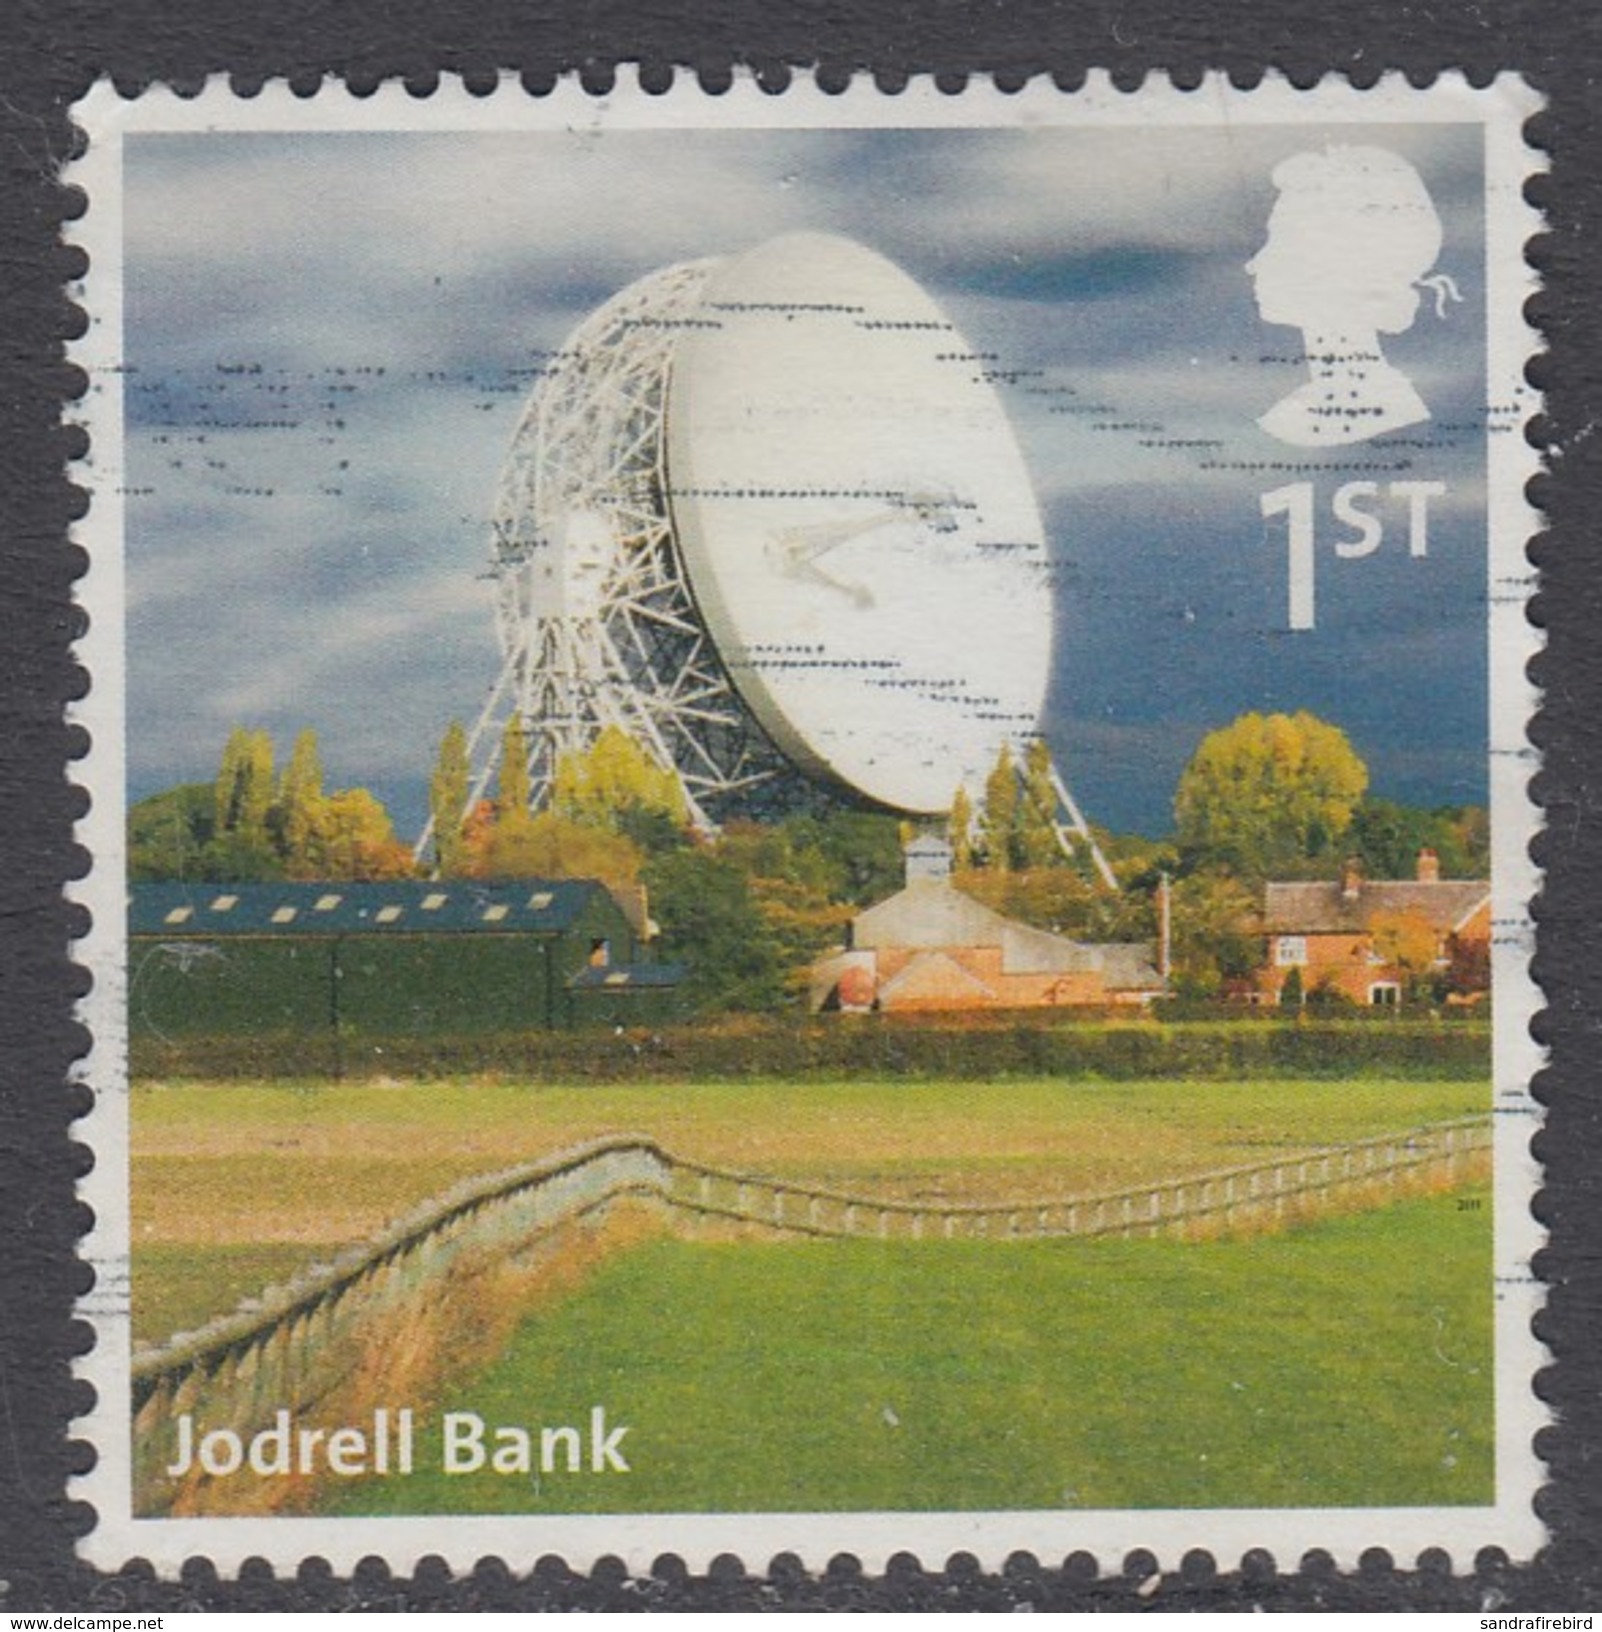 GREAT BRITAIN - 2011 Great Britain A-Z - Jodrell Bank 1st  SG3239 Fine Used - Used Stamps